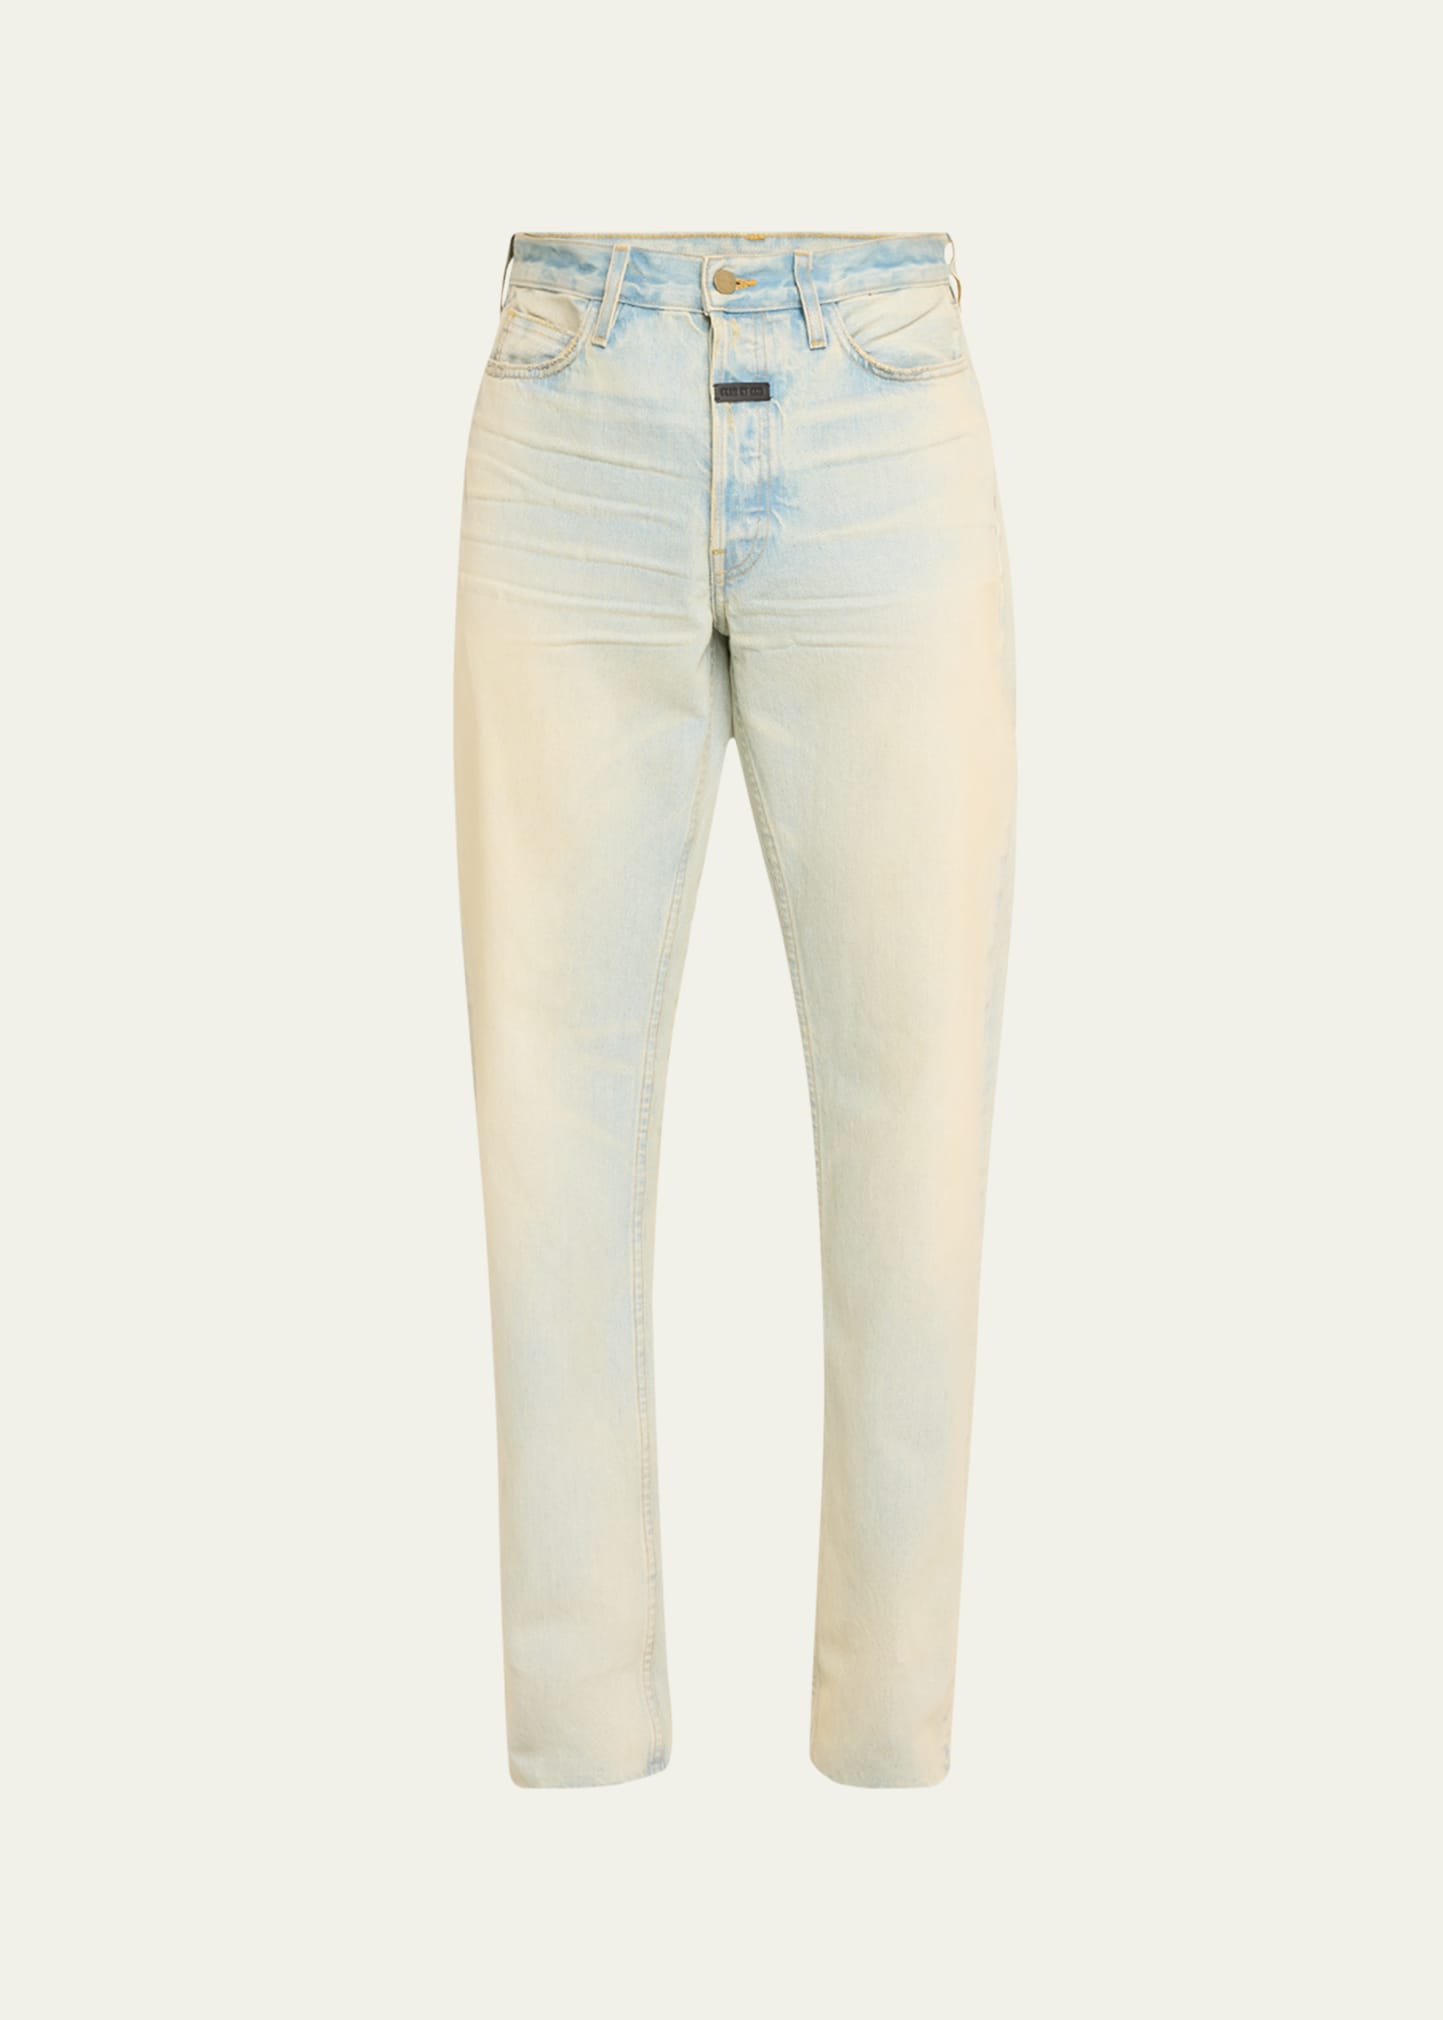 Men's Washed Straight-Leg Jeans